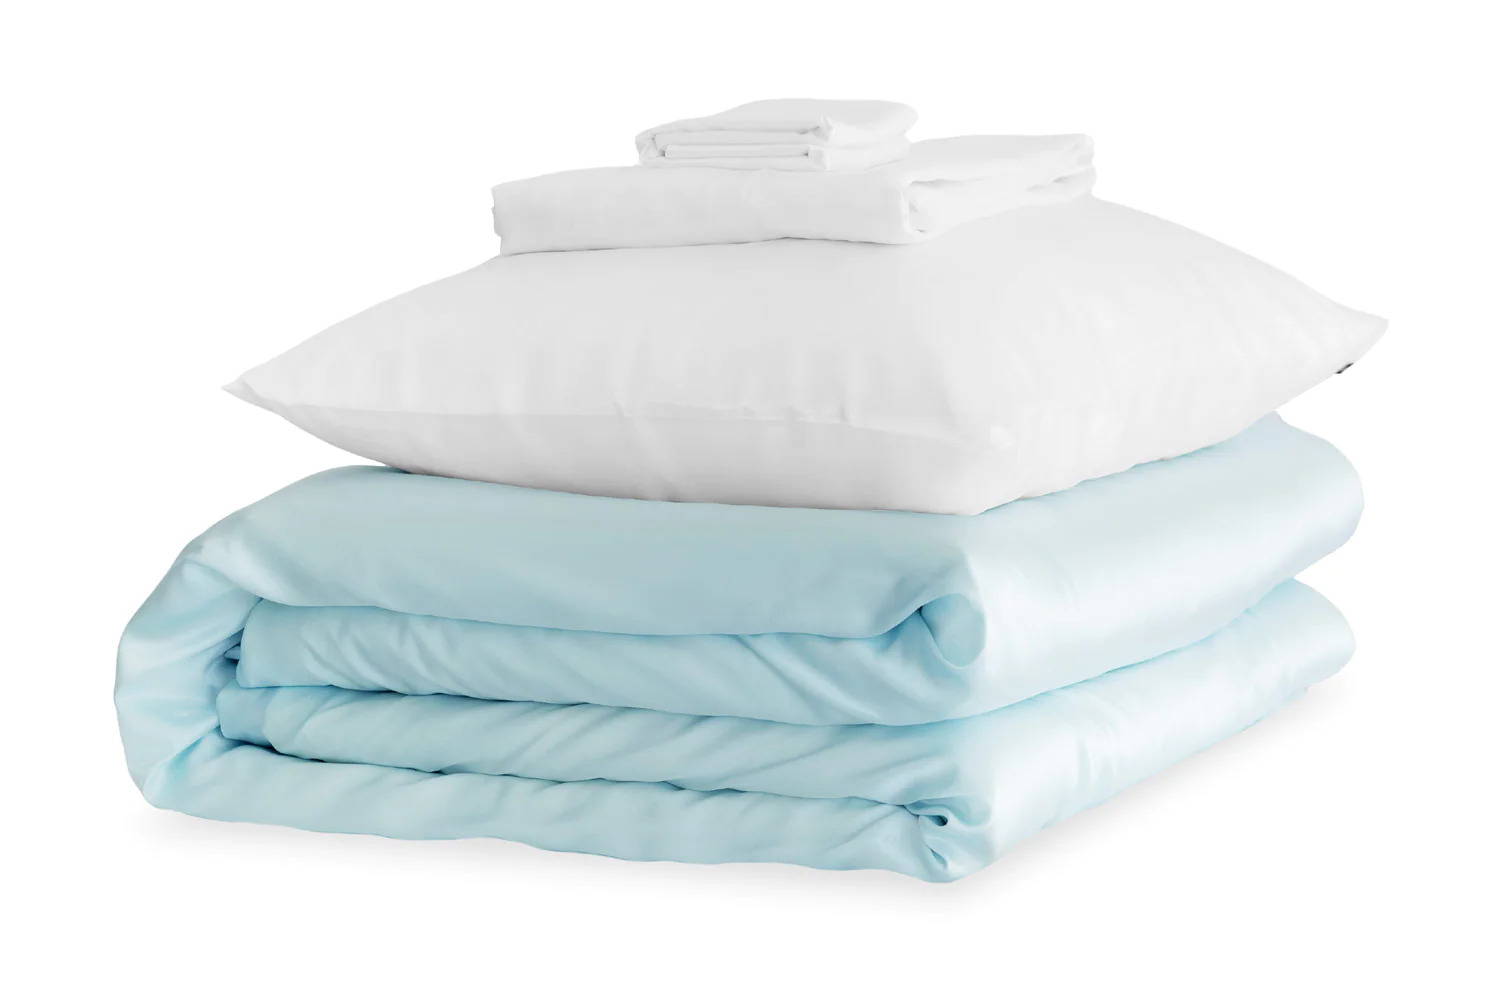 Pastel blue and white silk sheets set